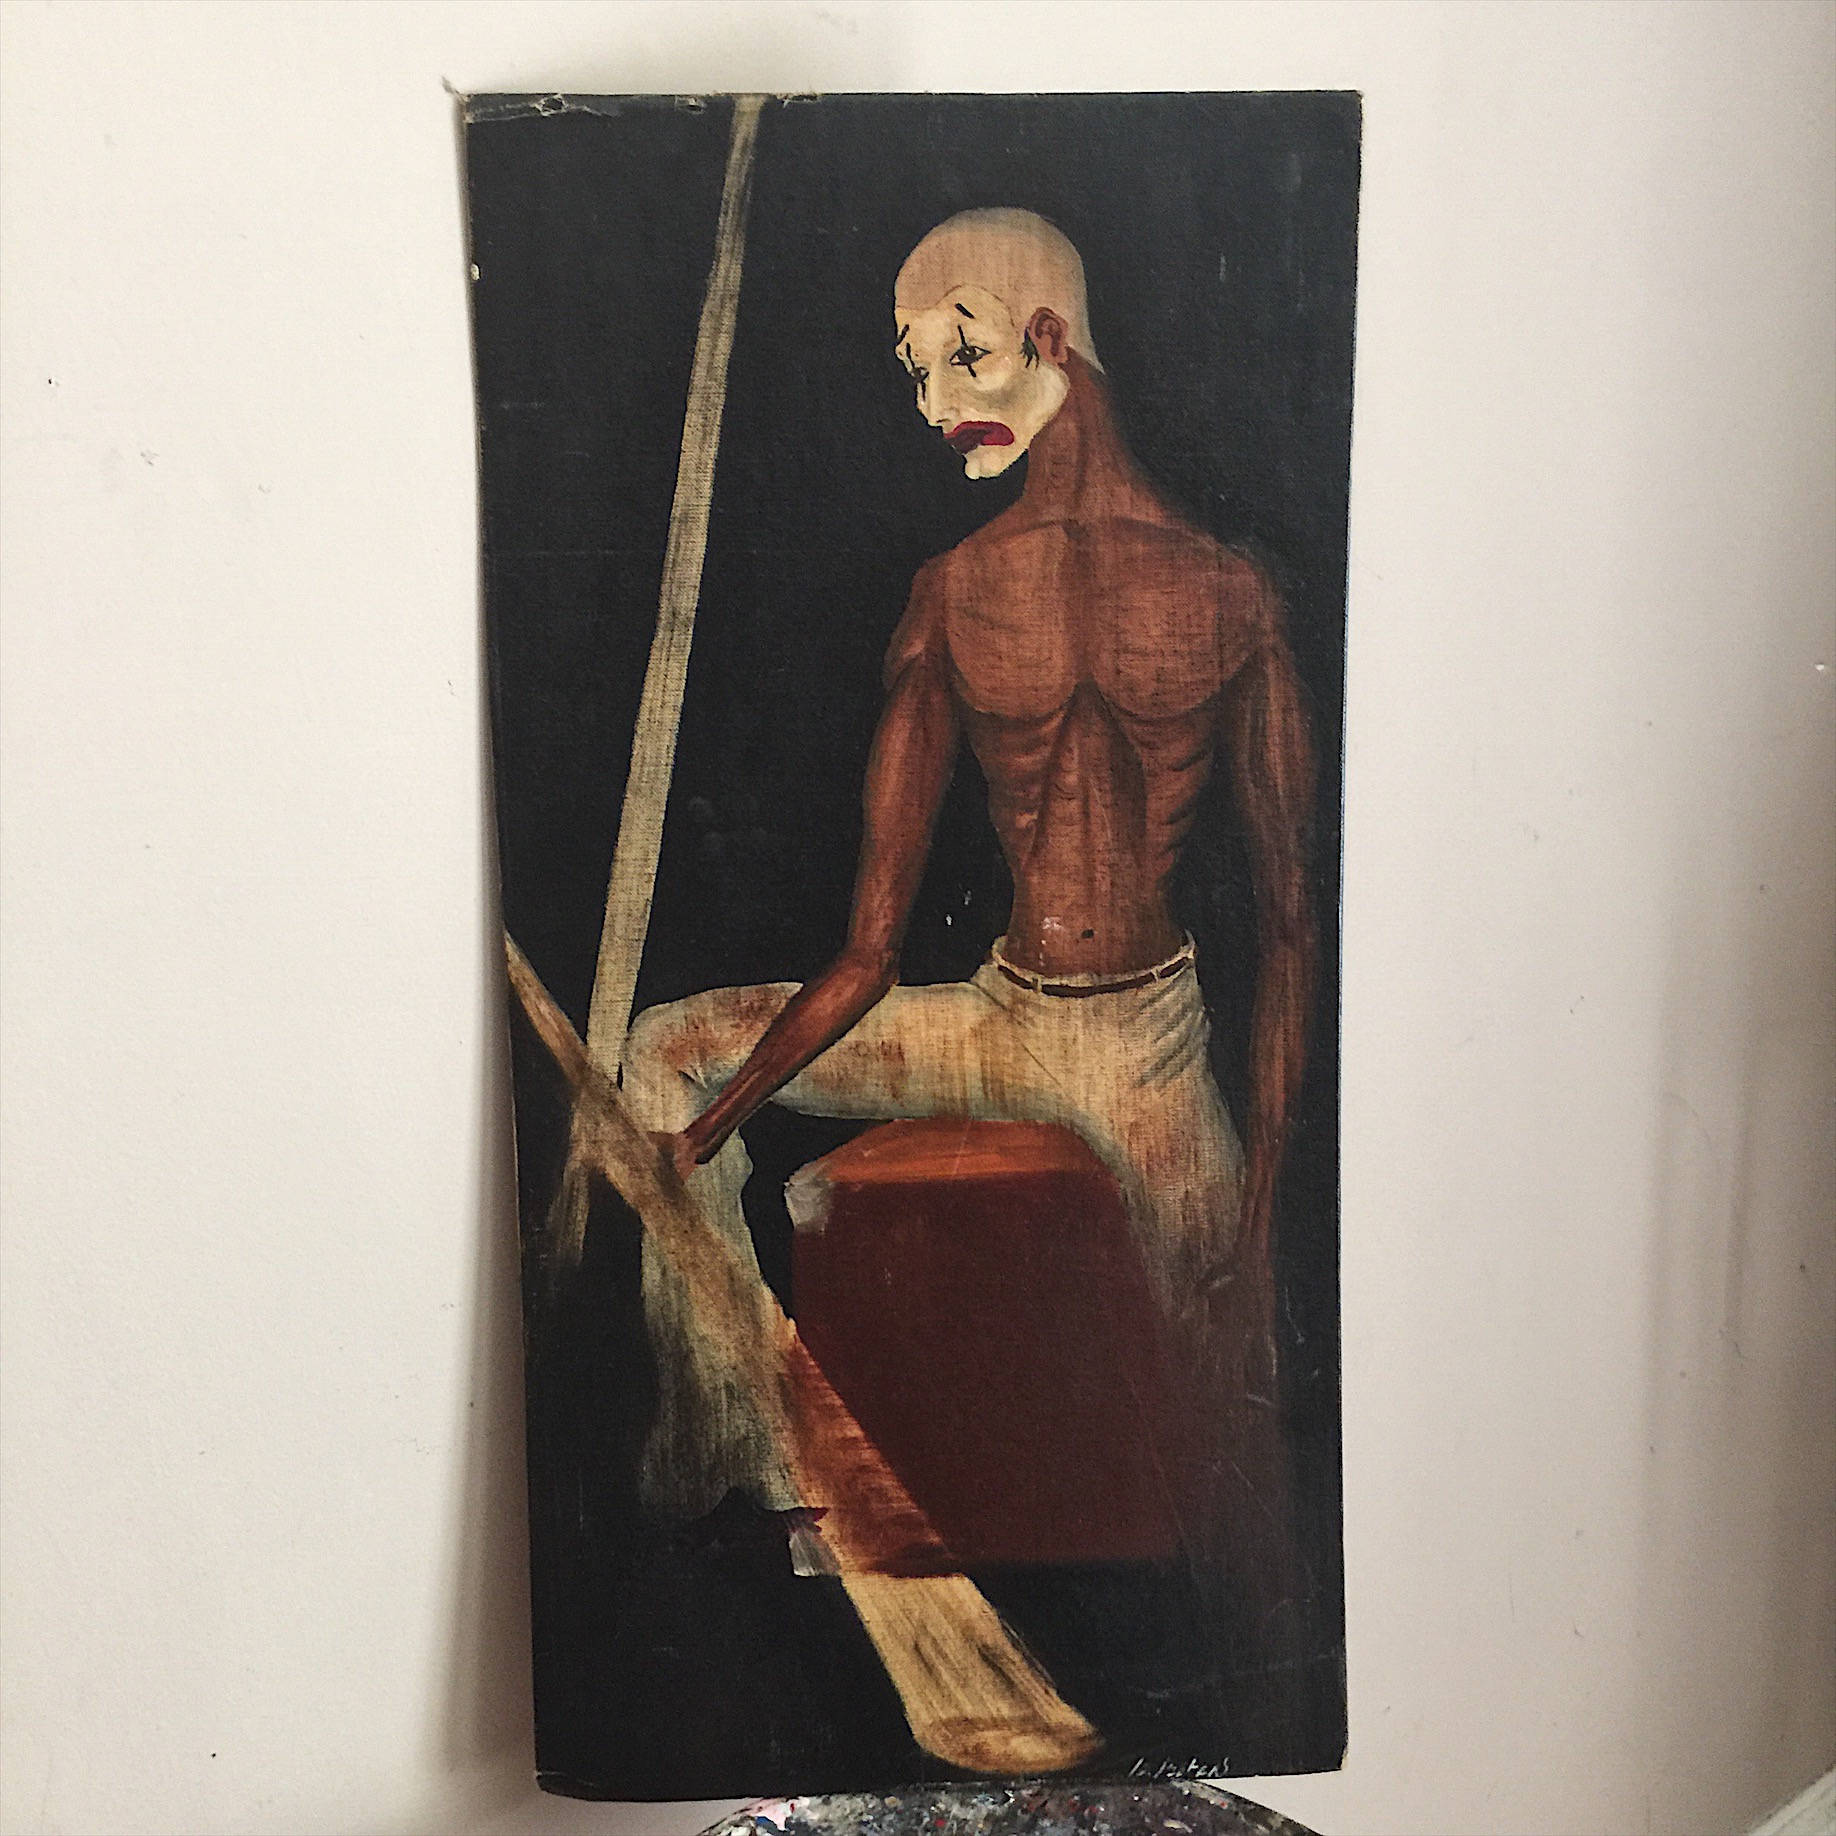 Vintage Creepy Painting of Clown Mime - Signed - 1950s? - Mystery Artist - Morbid Painting - Oil on Canvas Board - The Crow - Outside Art